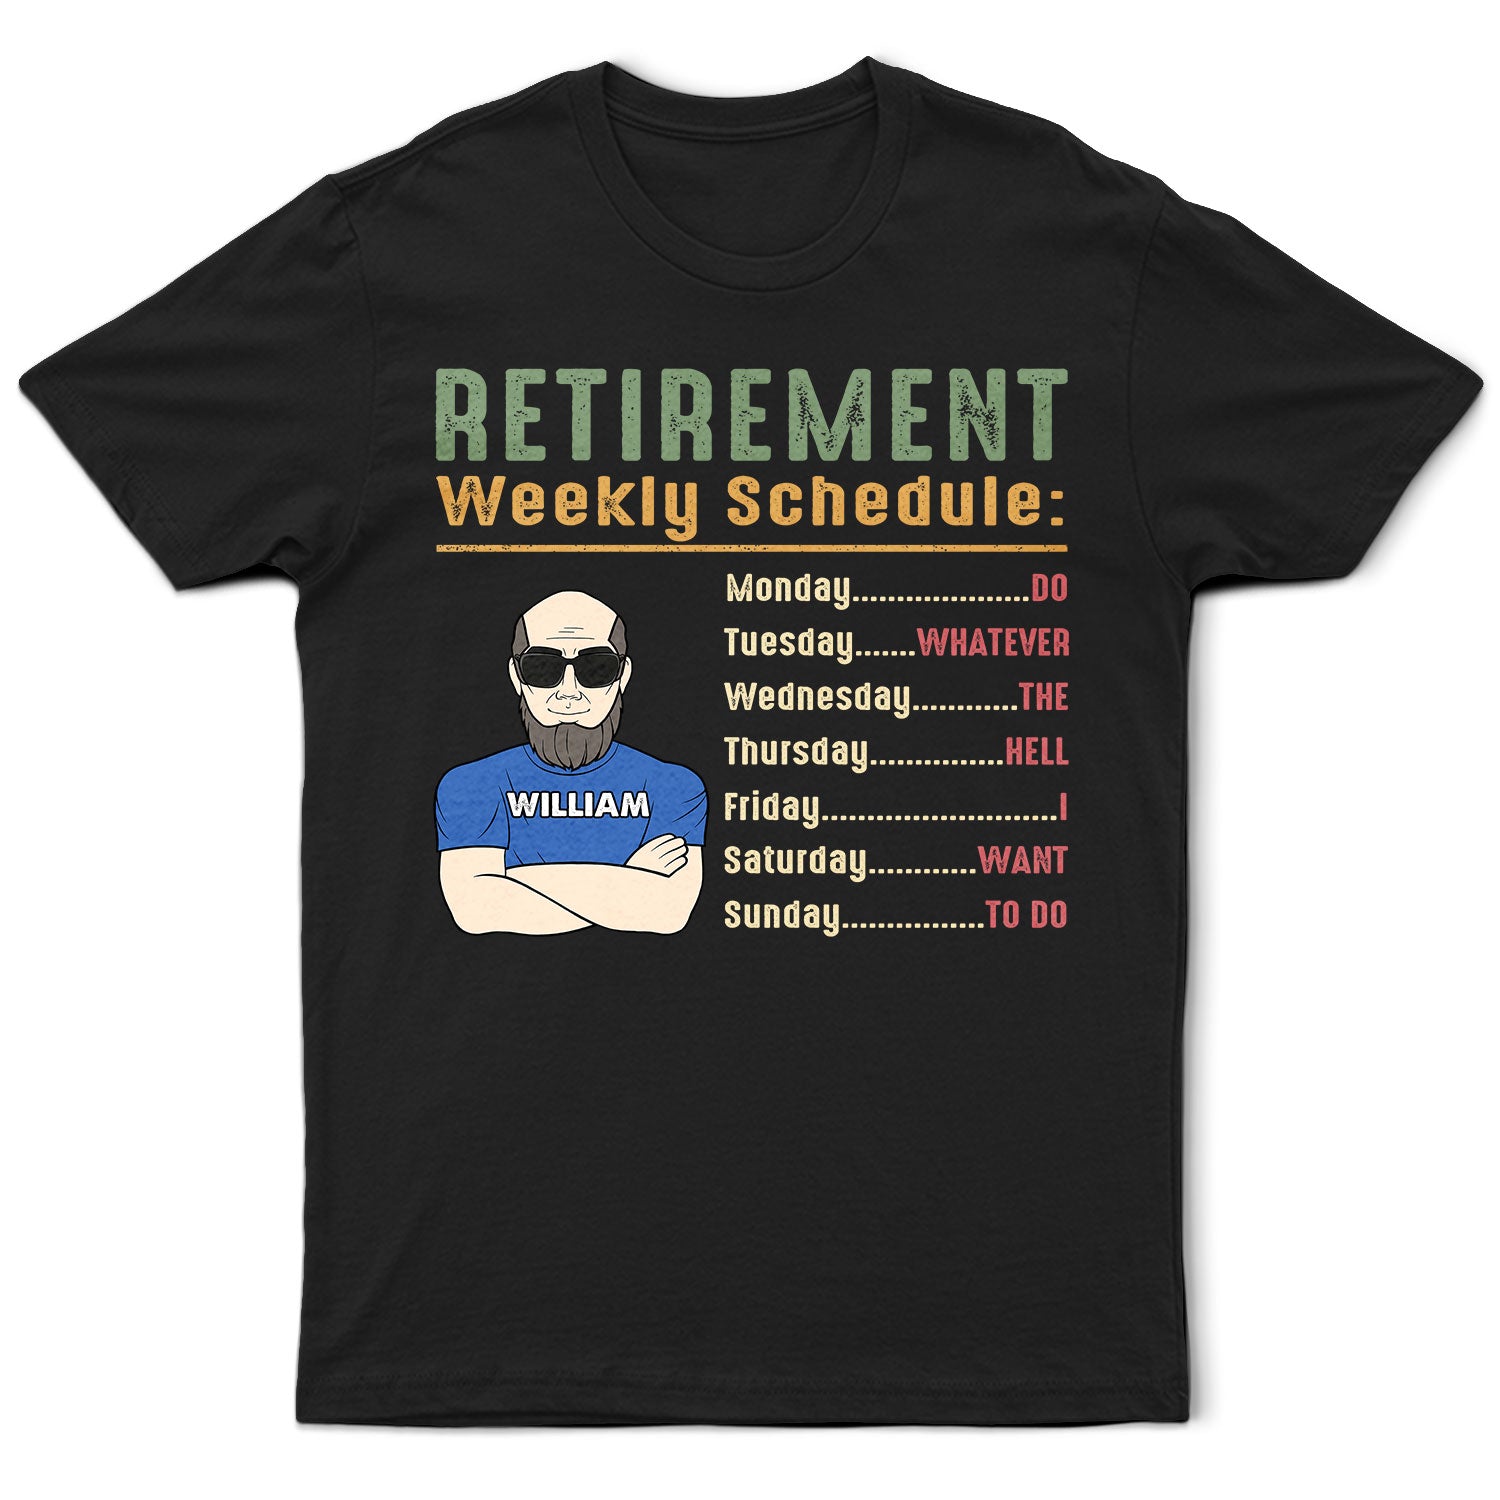 Retirement Weekly Schedule - Personalized T Shirt